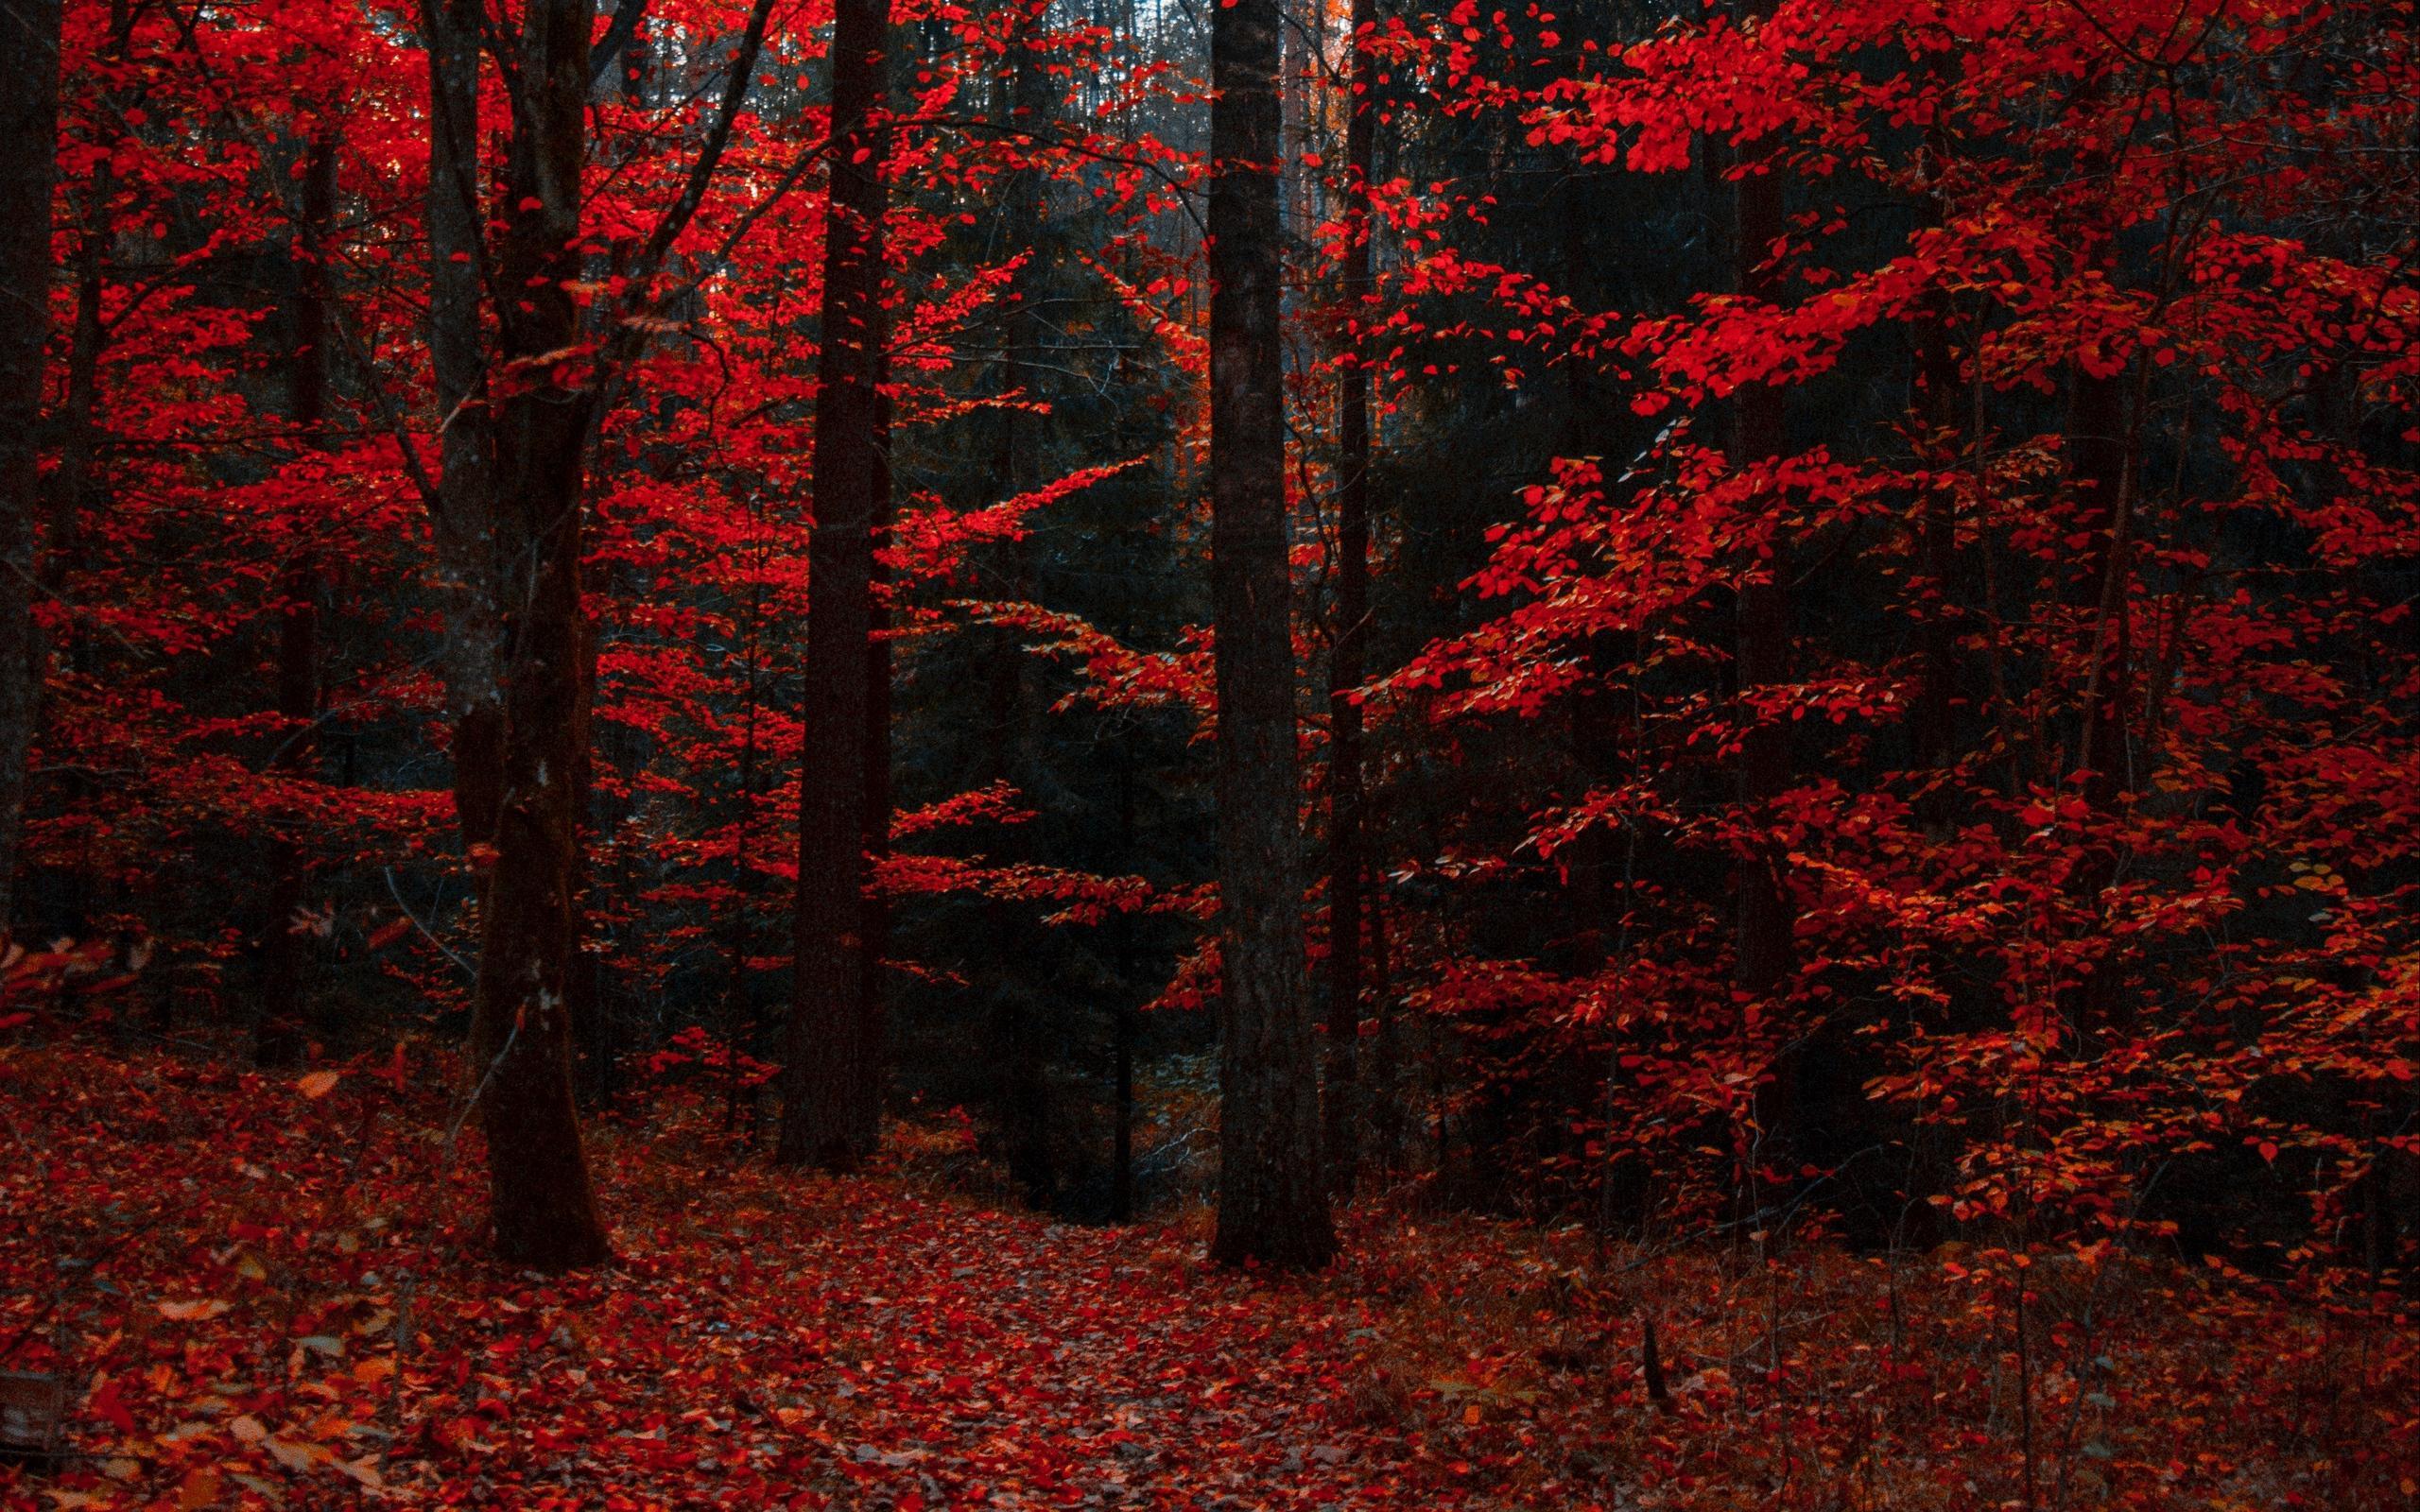 Download wallpaper 2560x1600 autumn, forest, trees, foliage, autumn colors widescreen 16:10 HD background